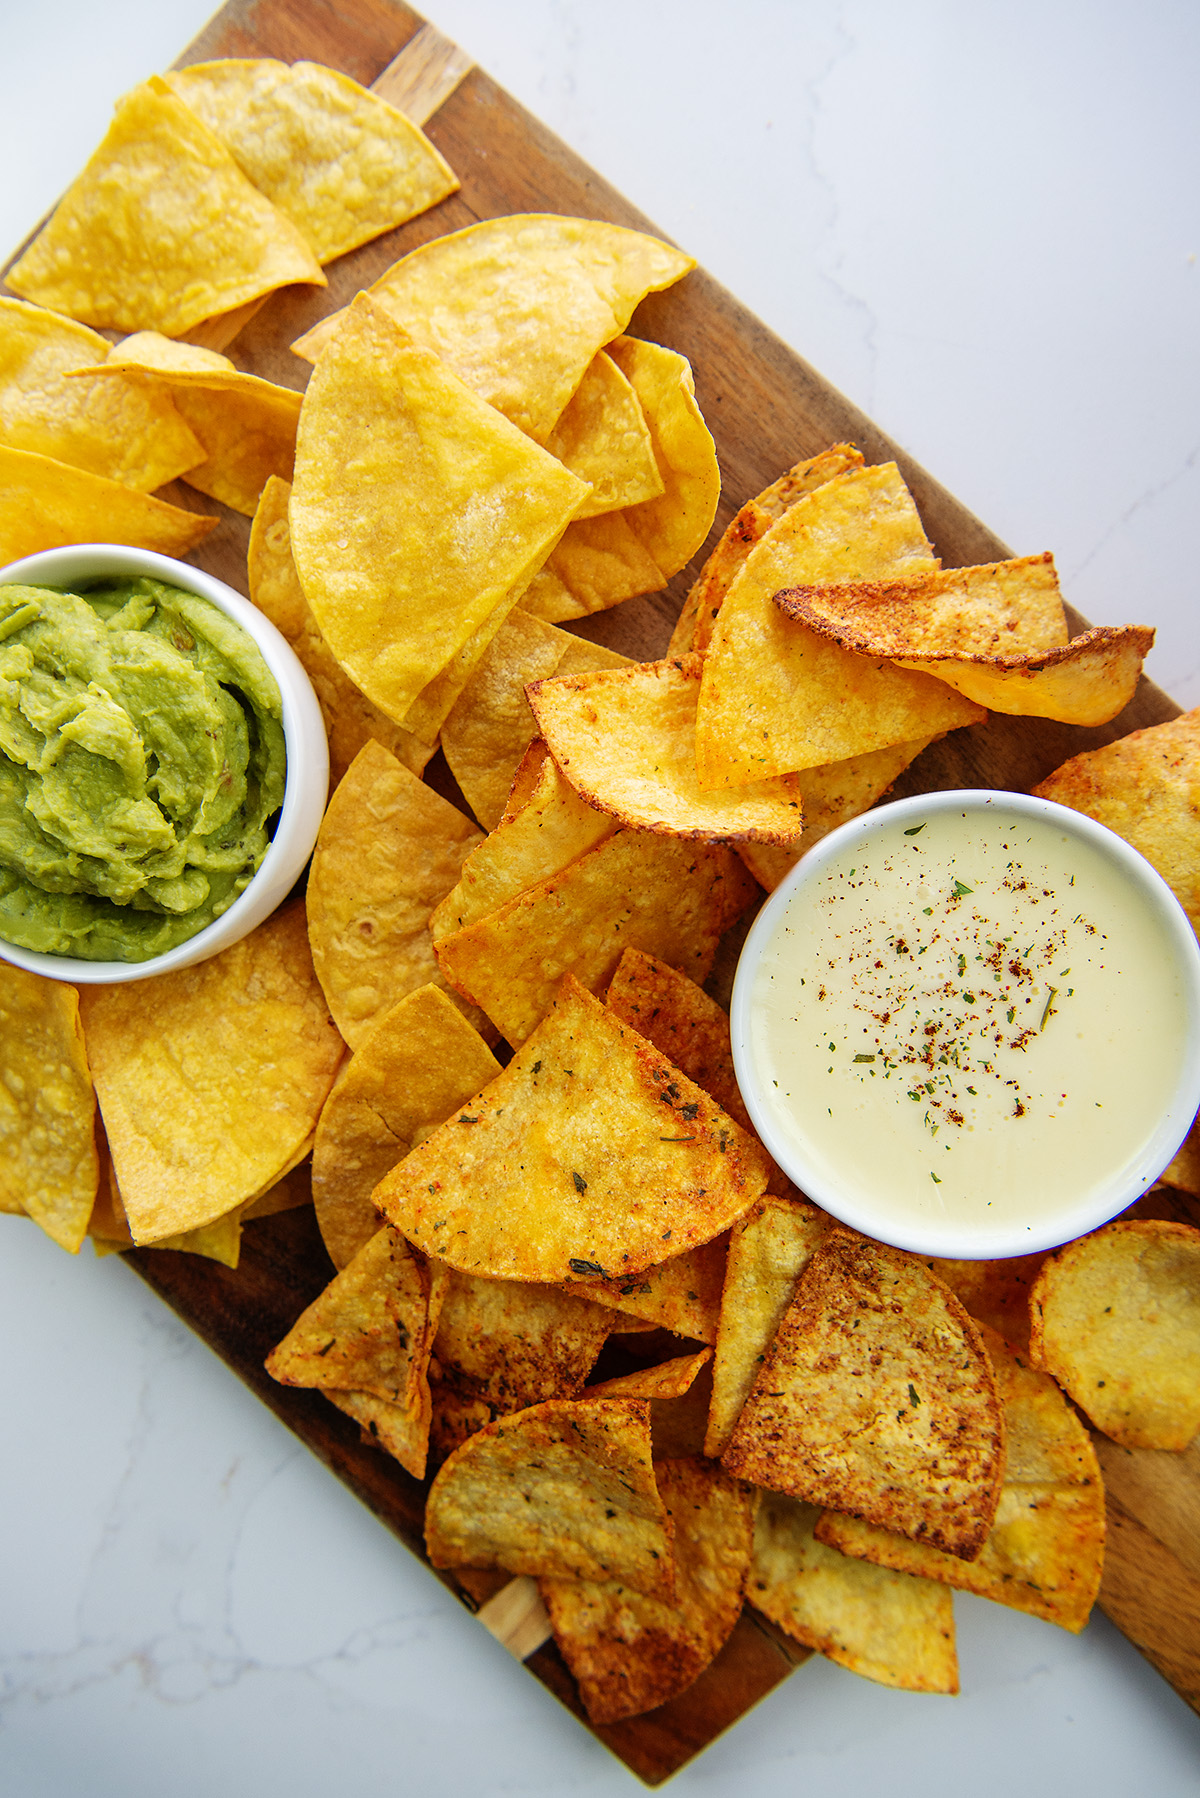 Cutting board with chips, guacamole, and queso dip